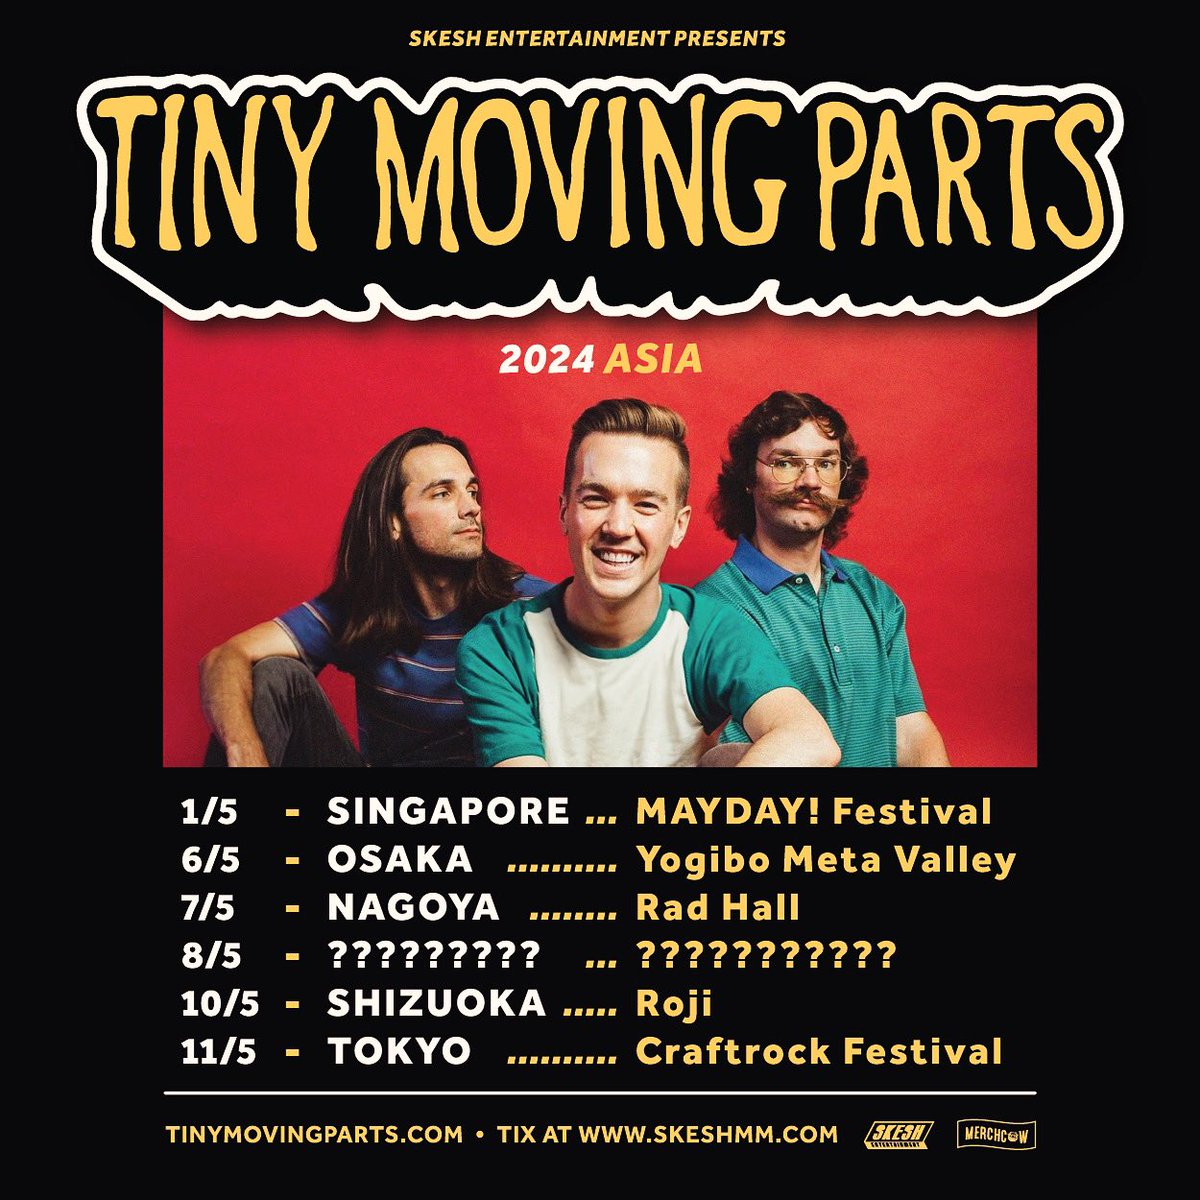 The boys are back! Catch @TinyMovingParts touring through Asia again this May! More shows to be announced soon.. Ticket details on our website. #TinyMovingParts #UnionWayJapan #SkeshEntertainment